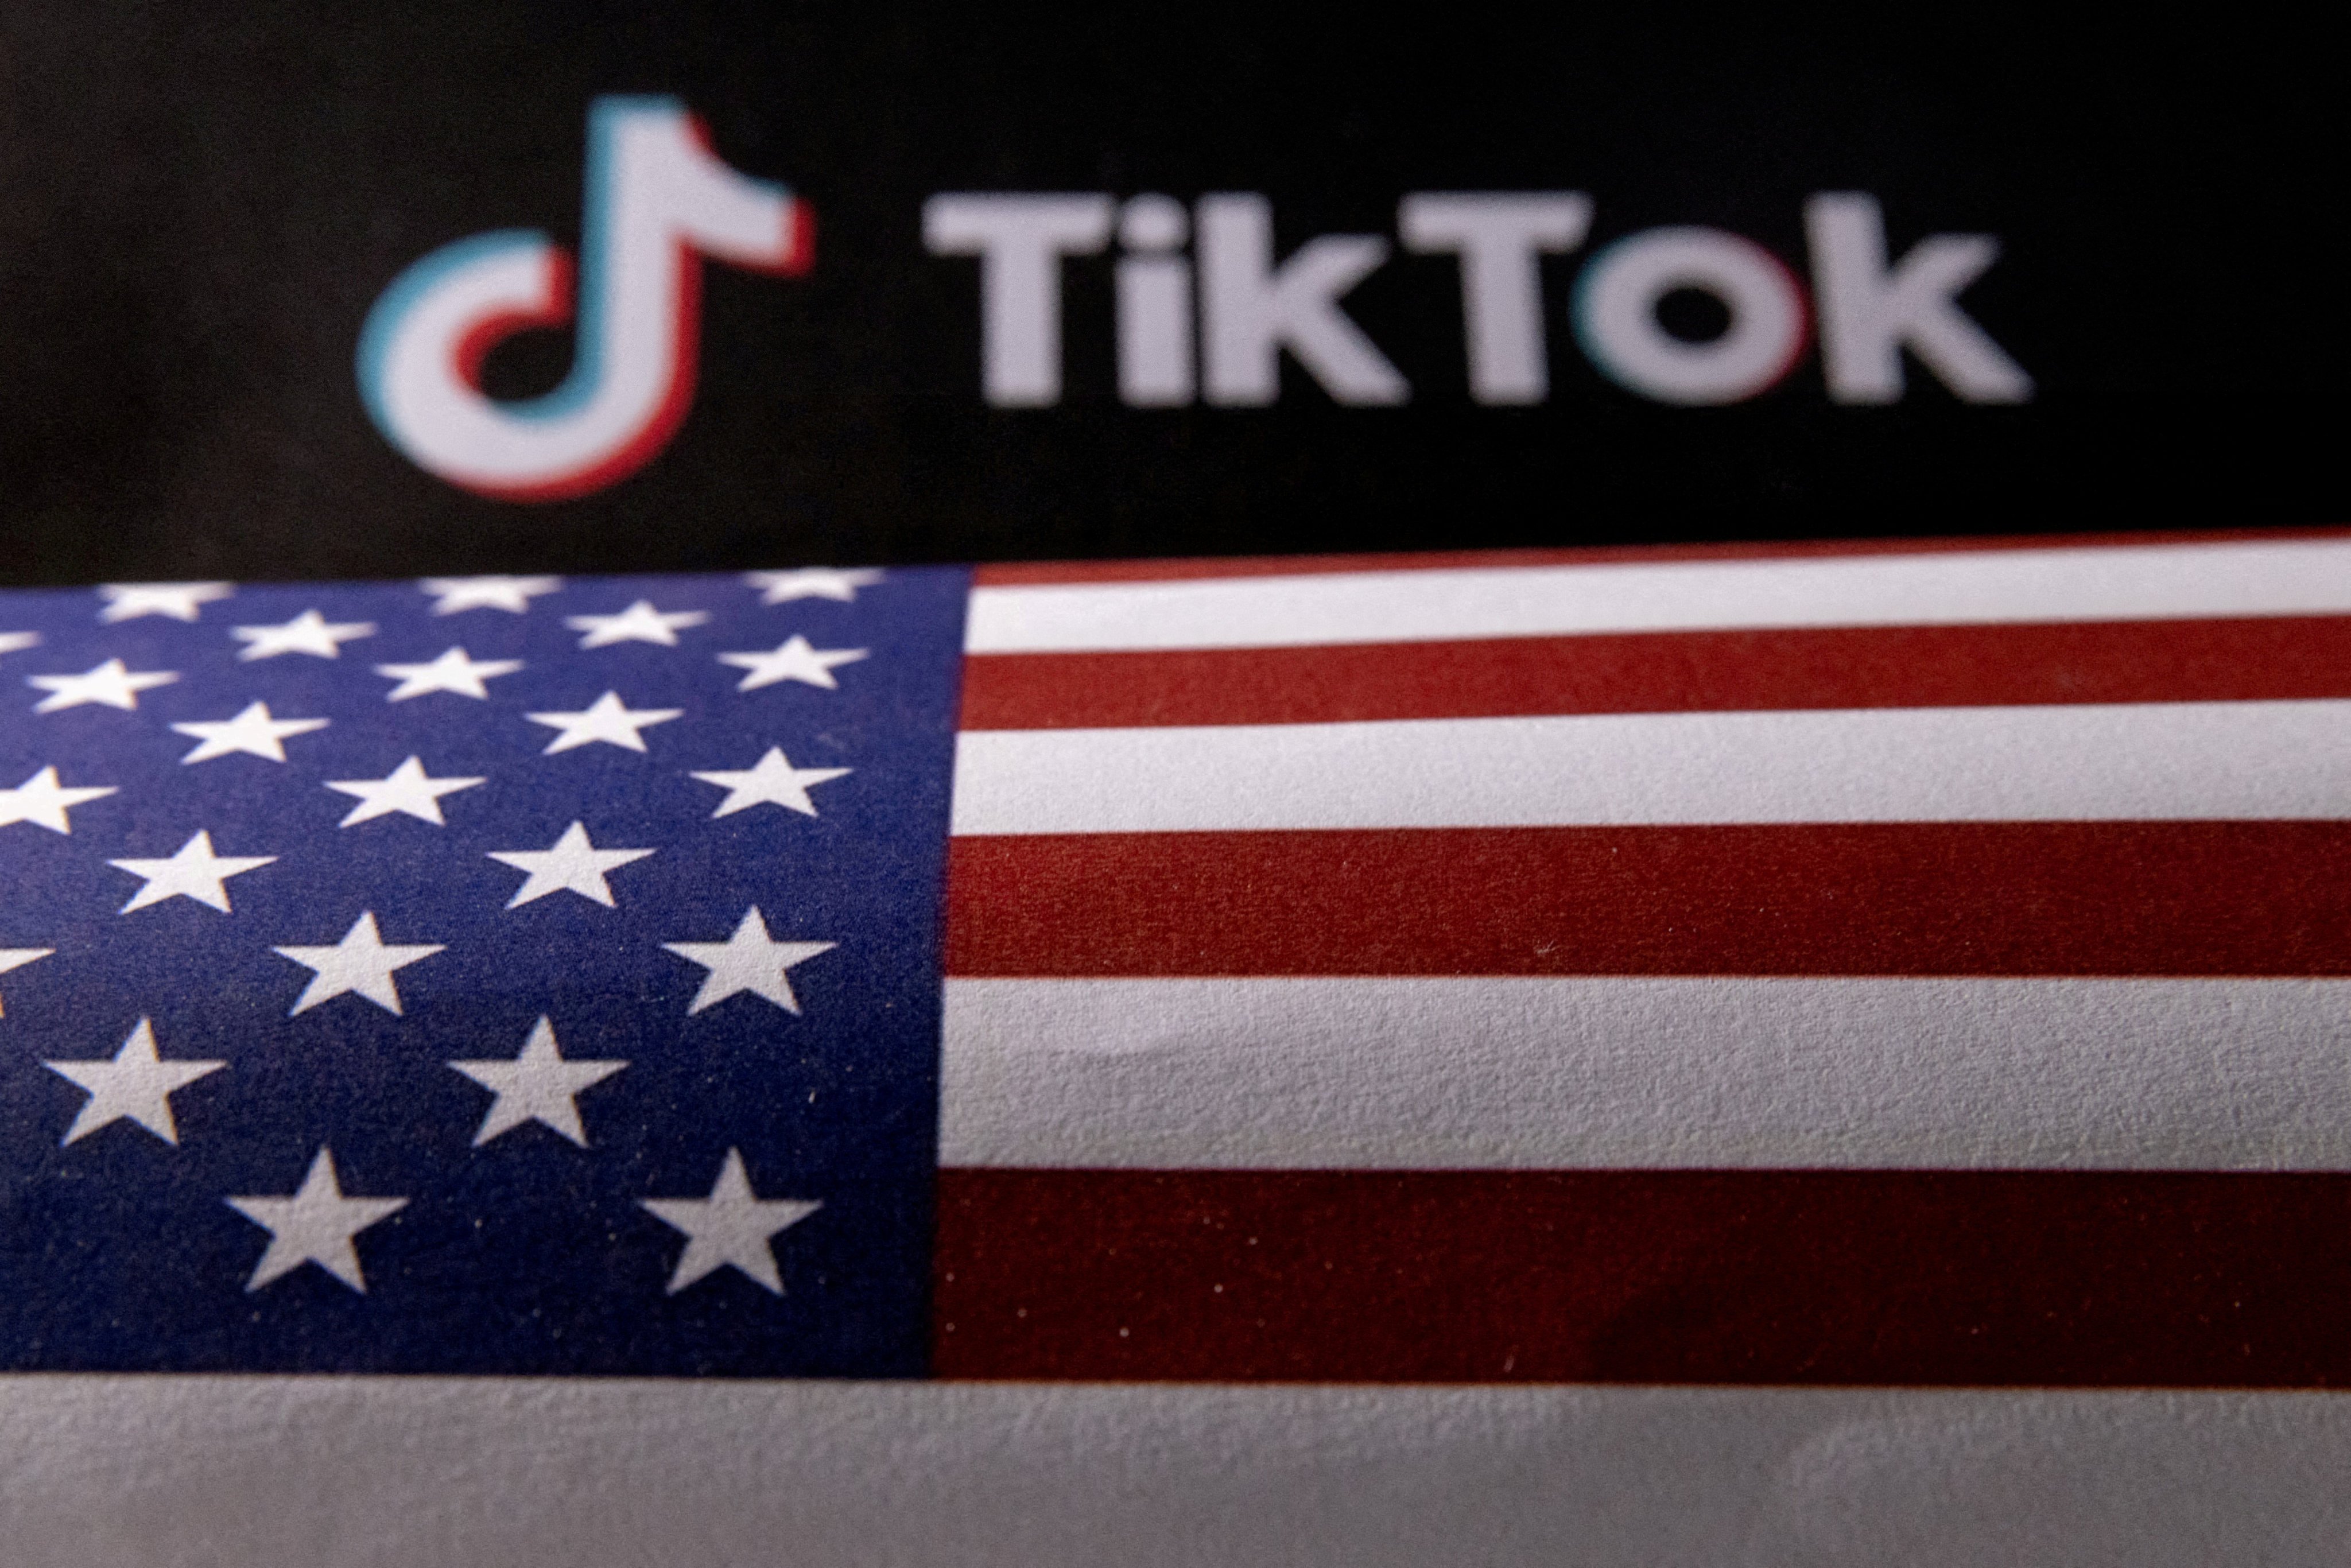 A US appeals court to hear legal challenges to the law that could ban TikTok in September. Photo: Reuters